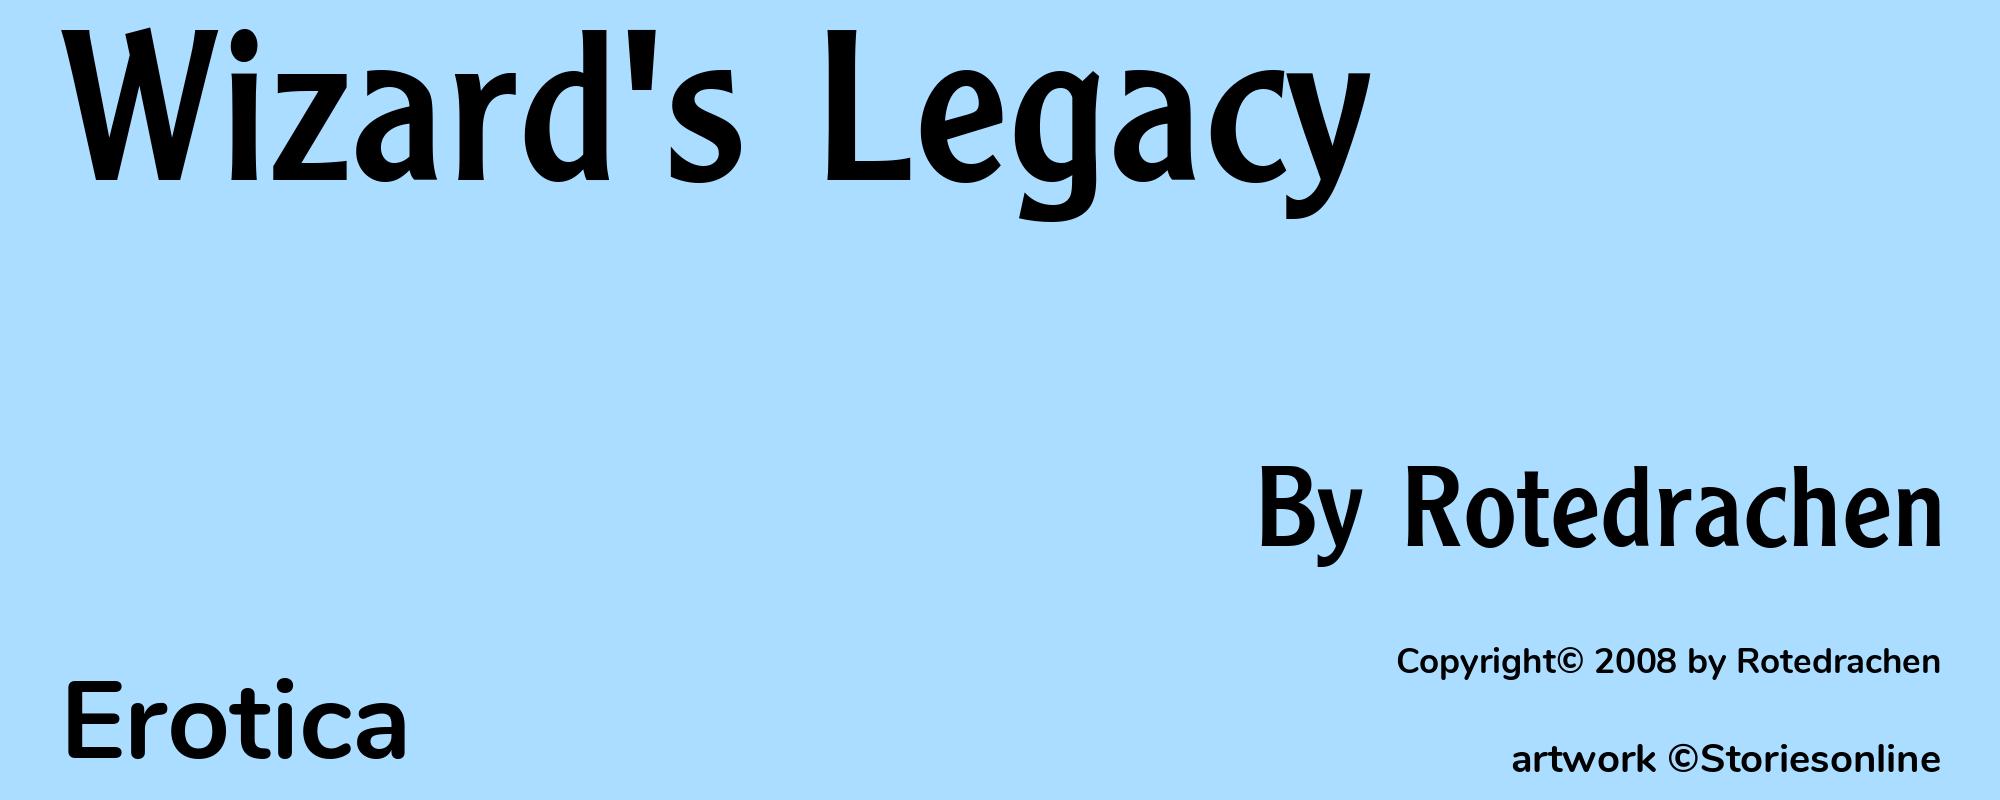 Wizard's Legacy - Cover